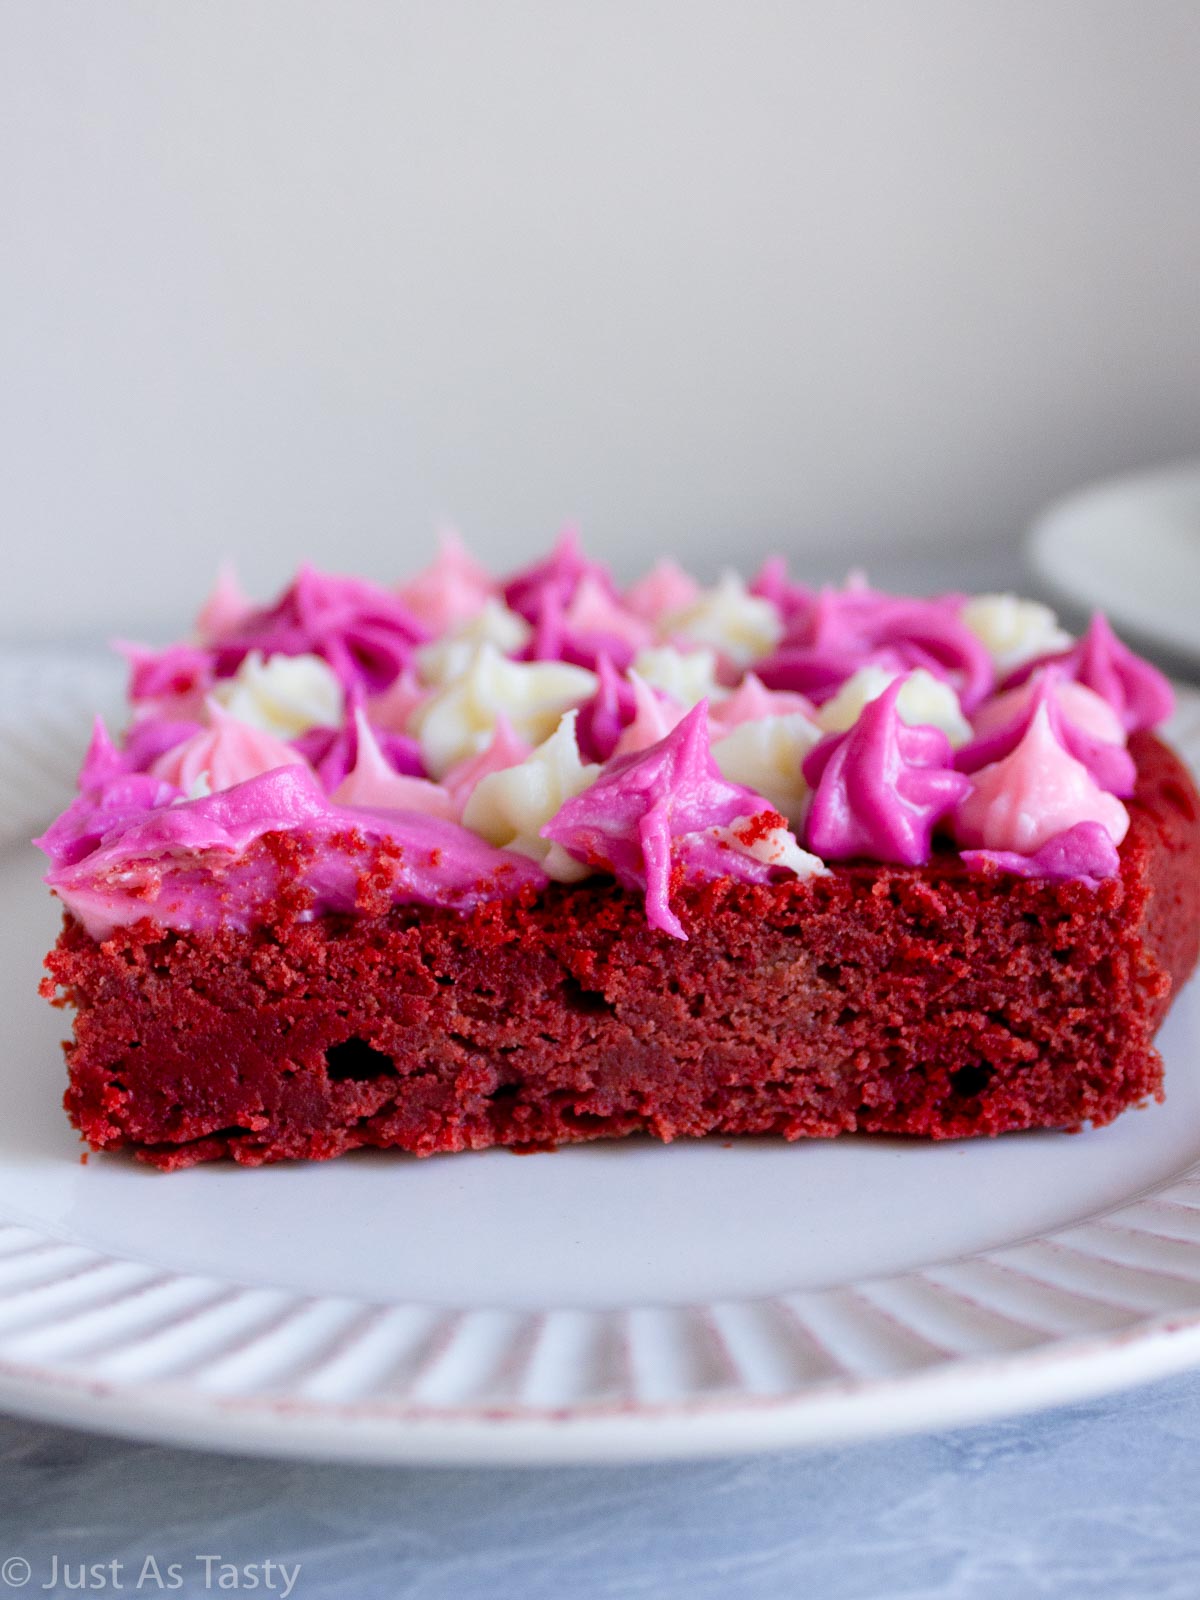 Close-up of a slice of gluten free red velvet cake with piped frosting on top.